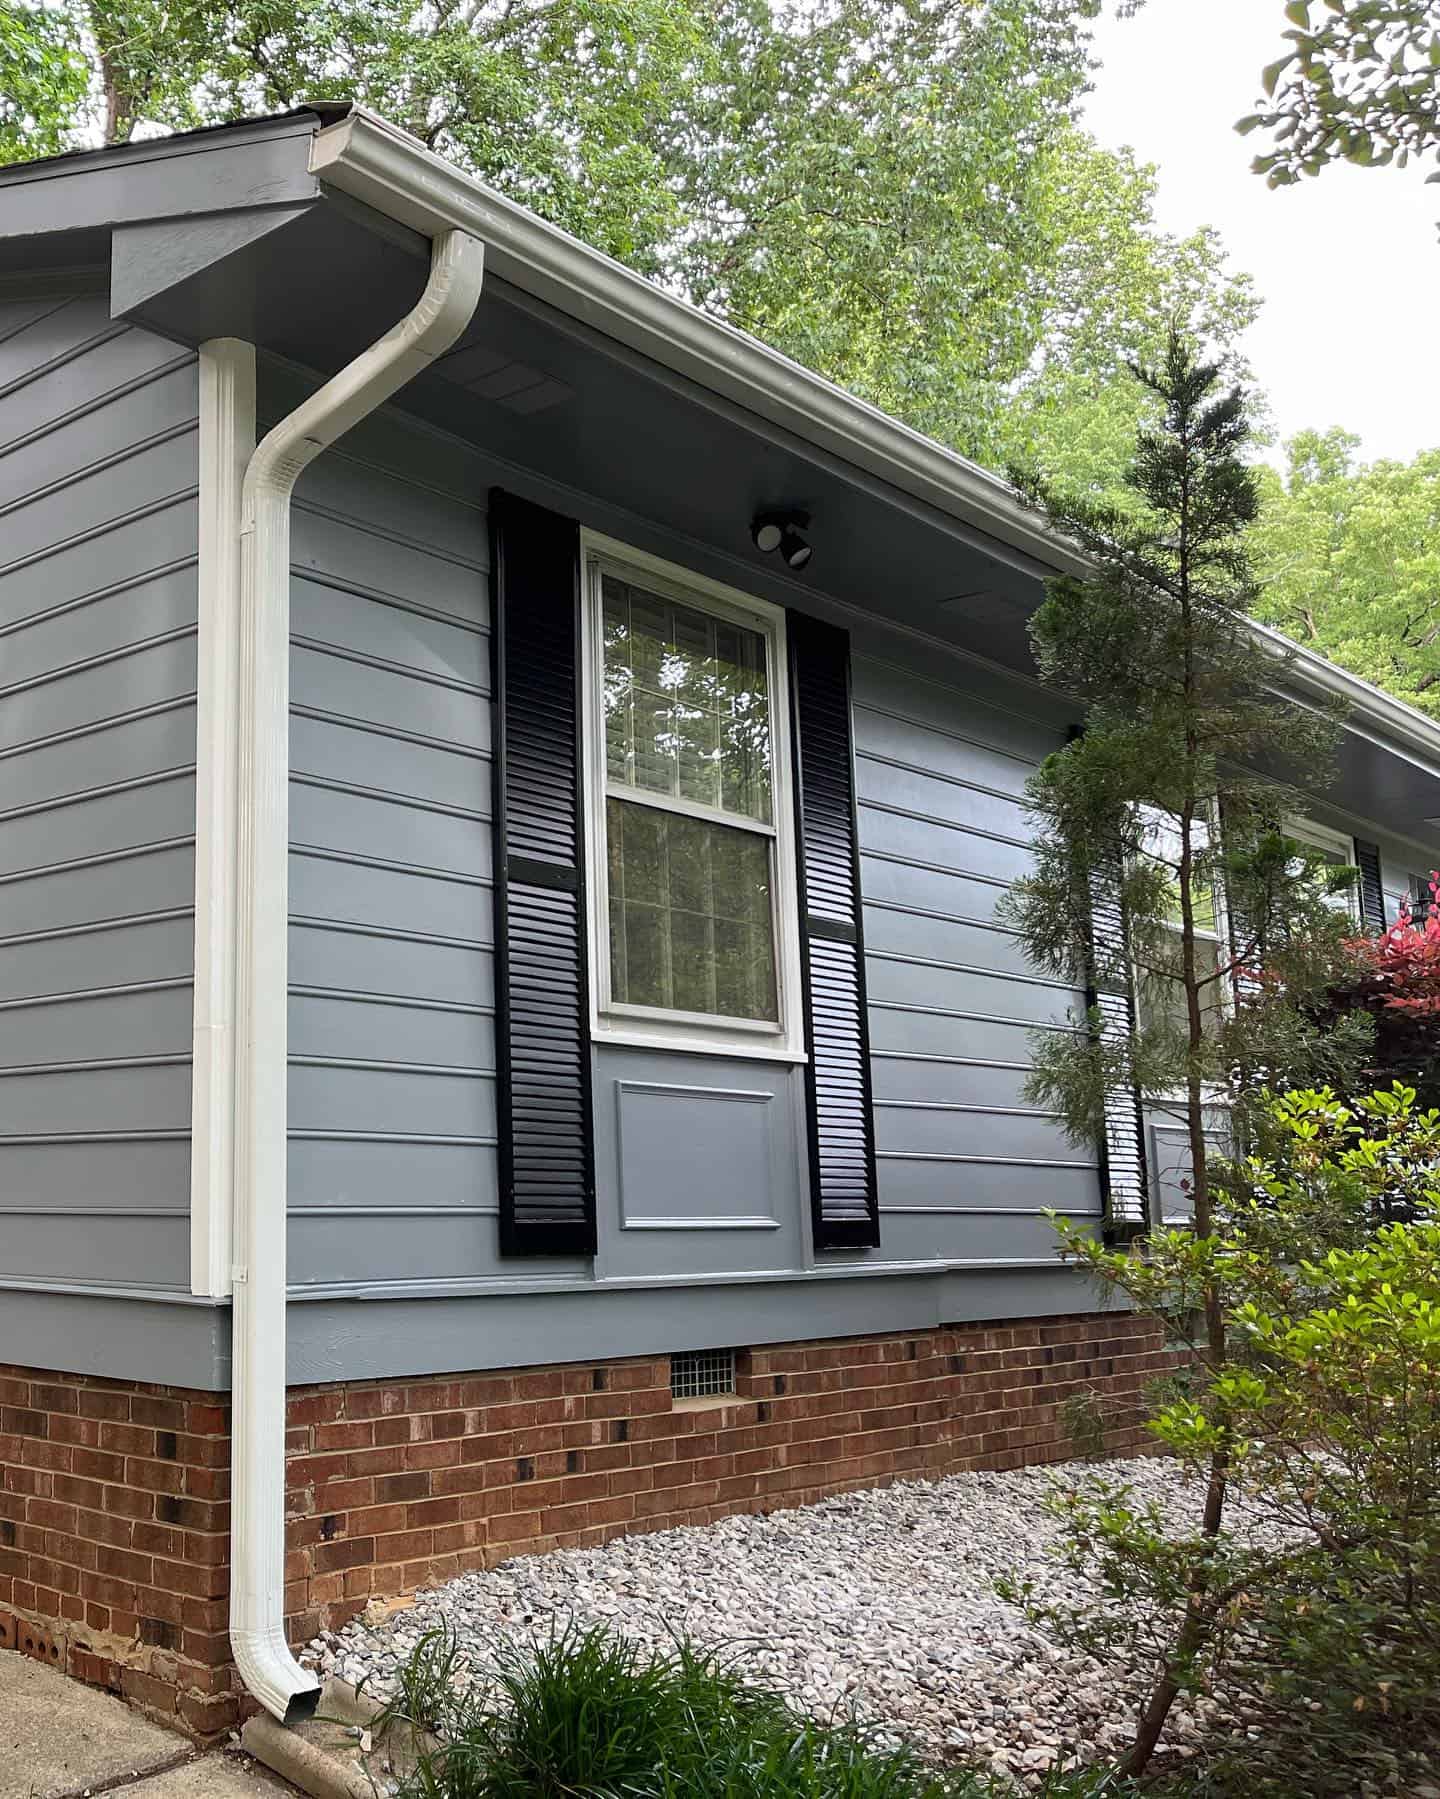 Revitalize your home's exterior with top-notch painting in Fuquay Varina, NC.